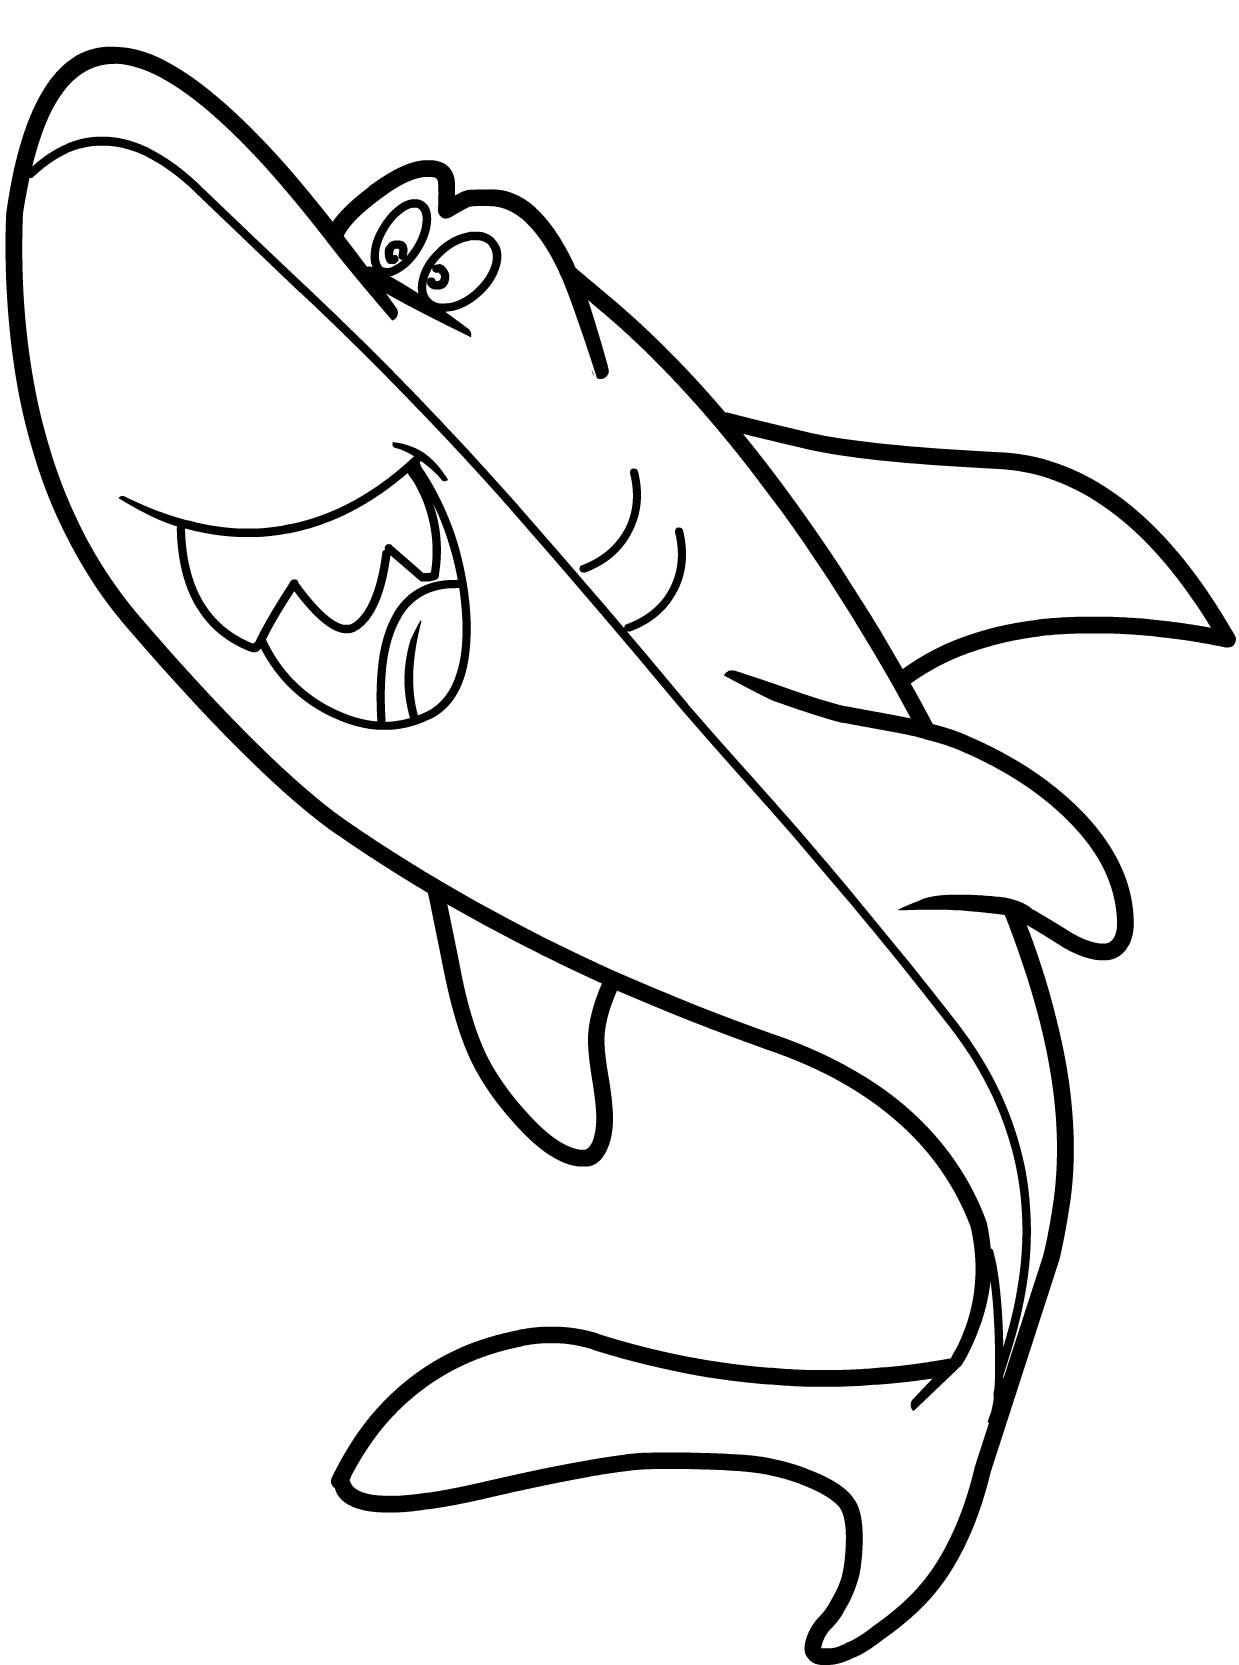 Draw a Cartoon Shark - Coloring In Your Shark ...